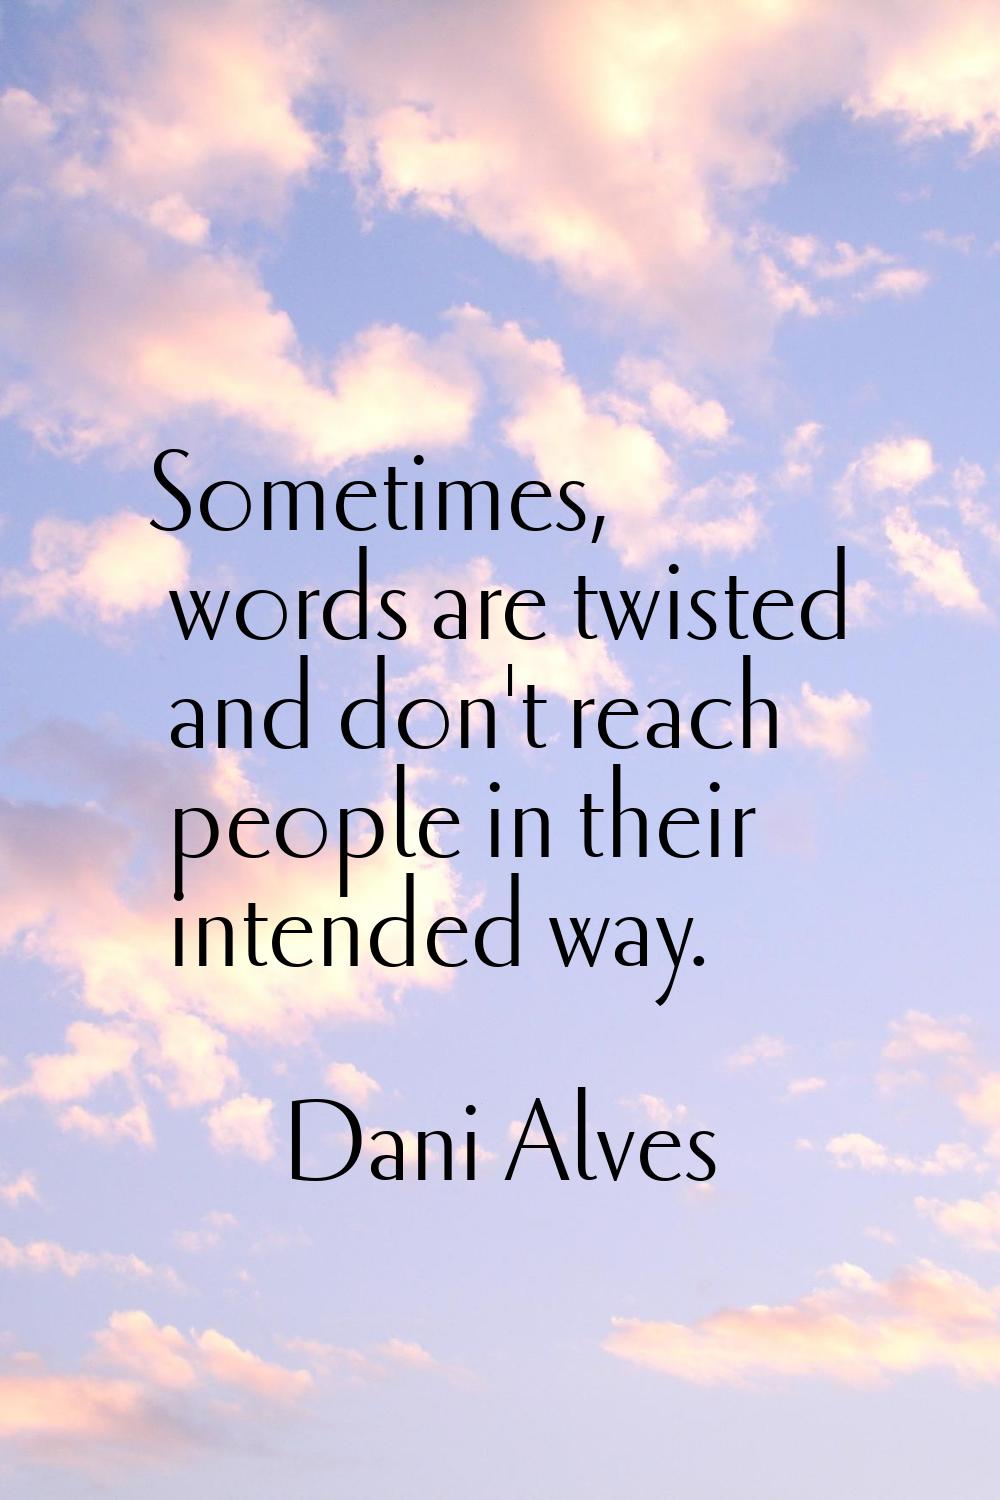 Sometimes, words are twisted and don't reach people in their intended way.